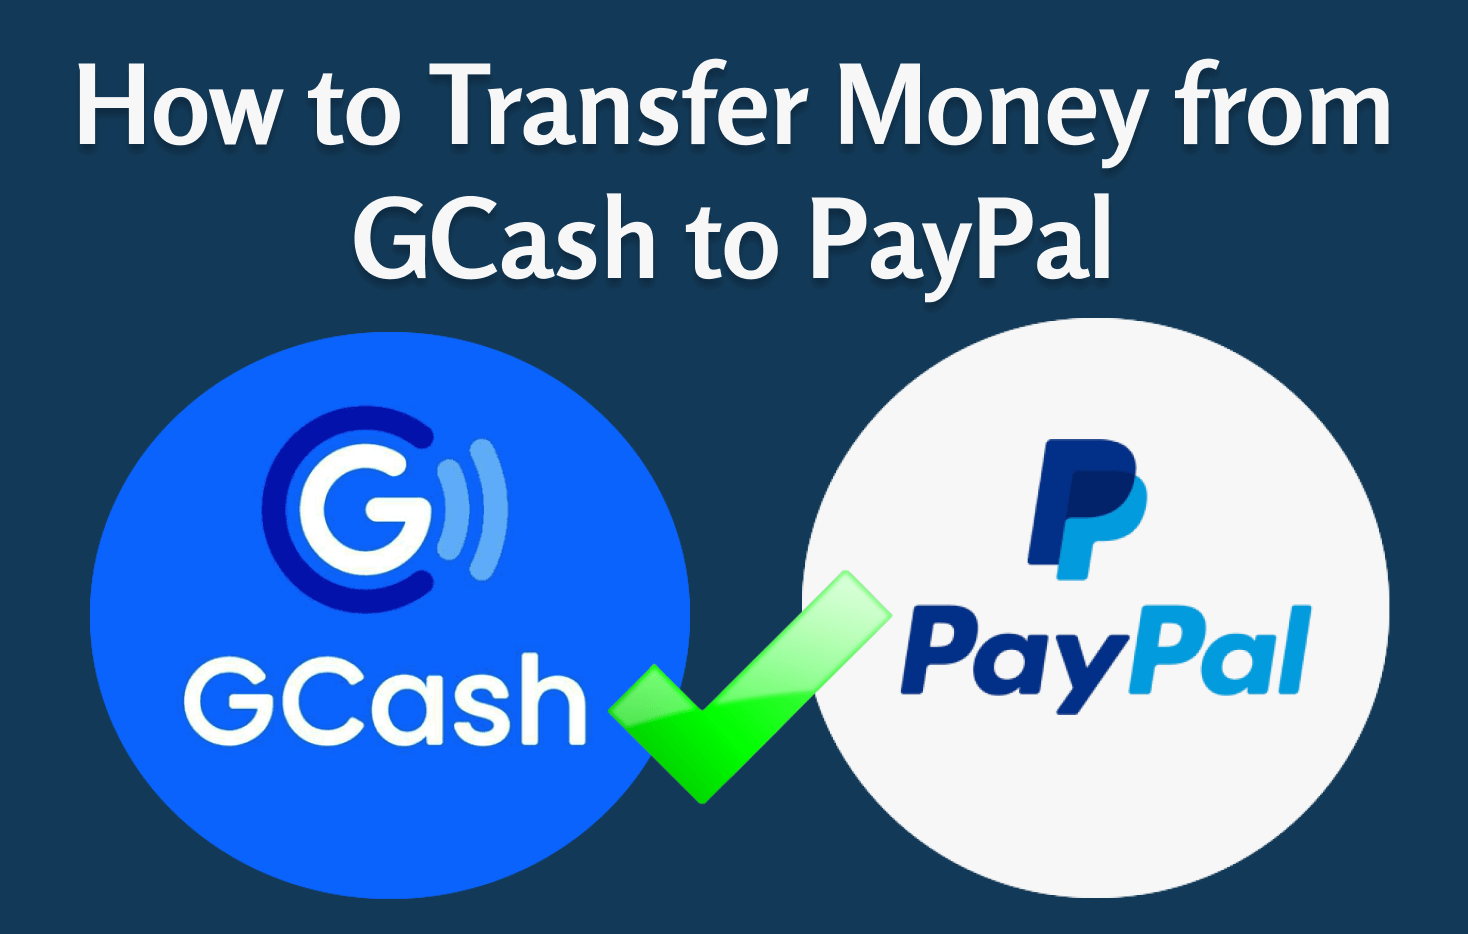 How to Transfer Money from PayPal to GCash Without Linking